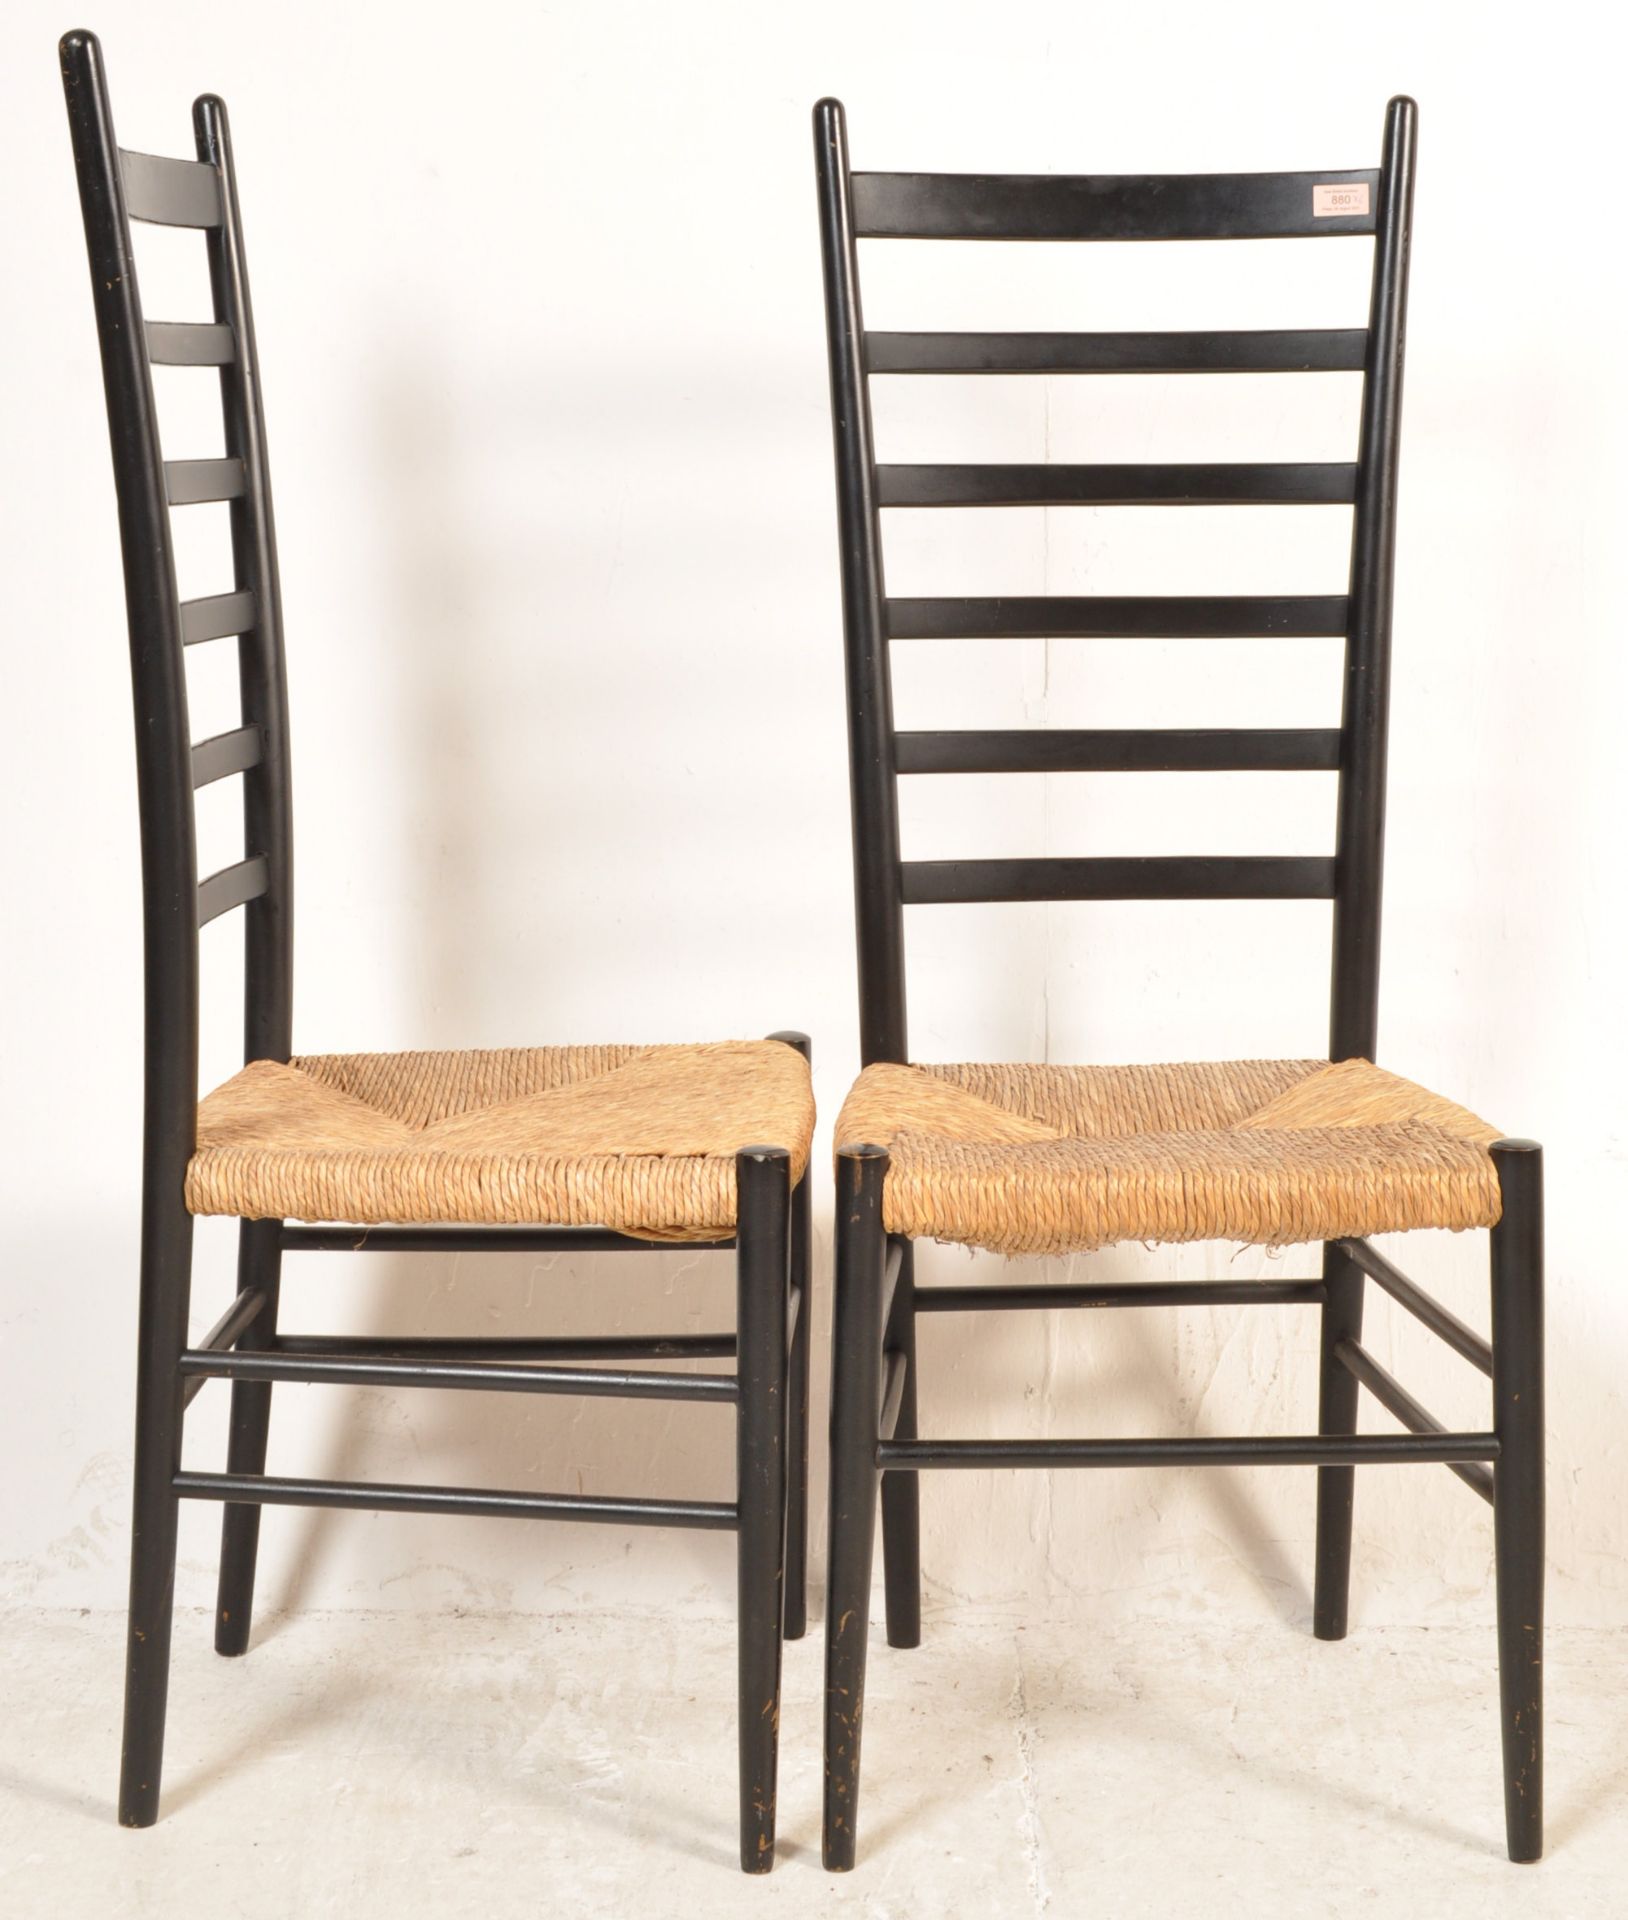 SET OF FOUR RUSH SEATS AND BLACK FRAME DINING CHAIRS - Image 6 of 6